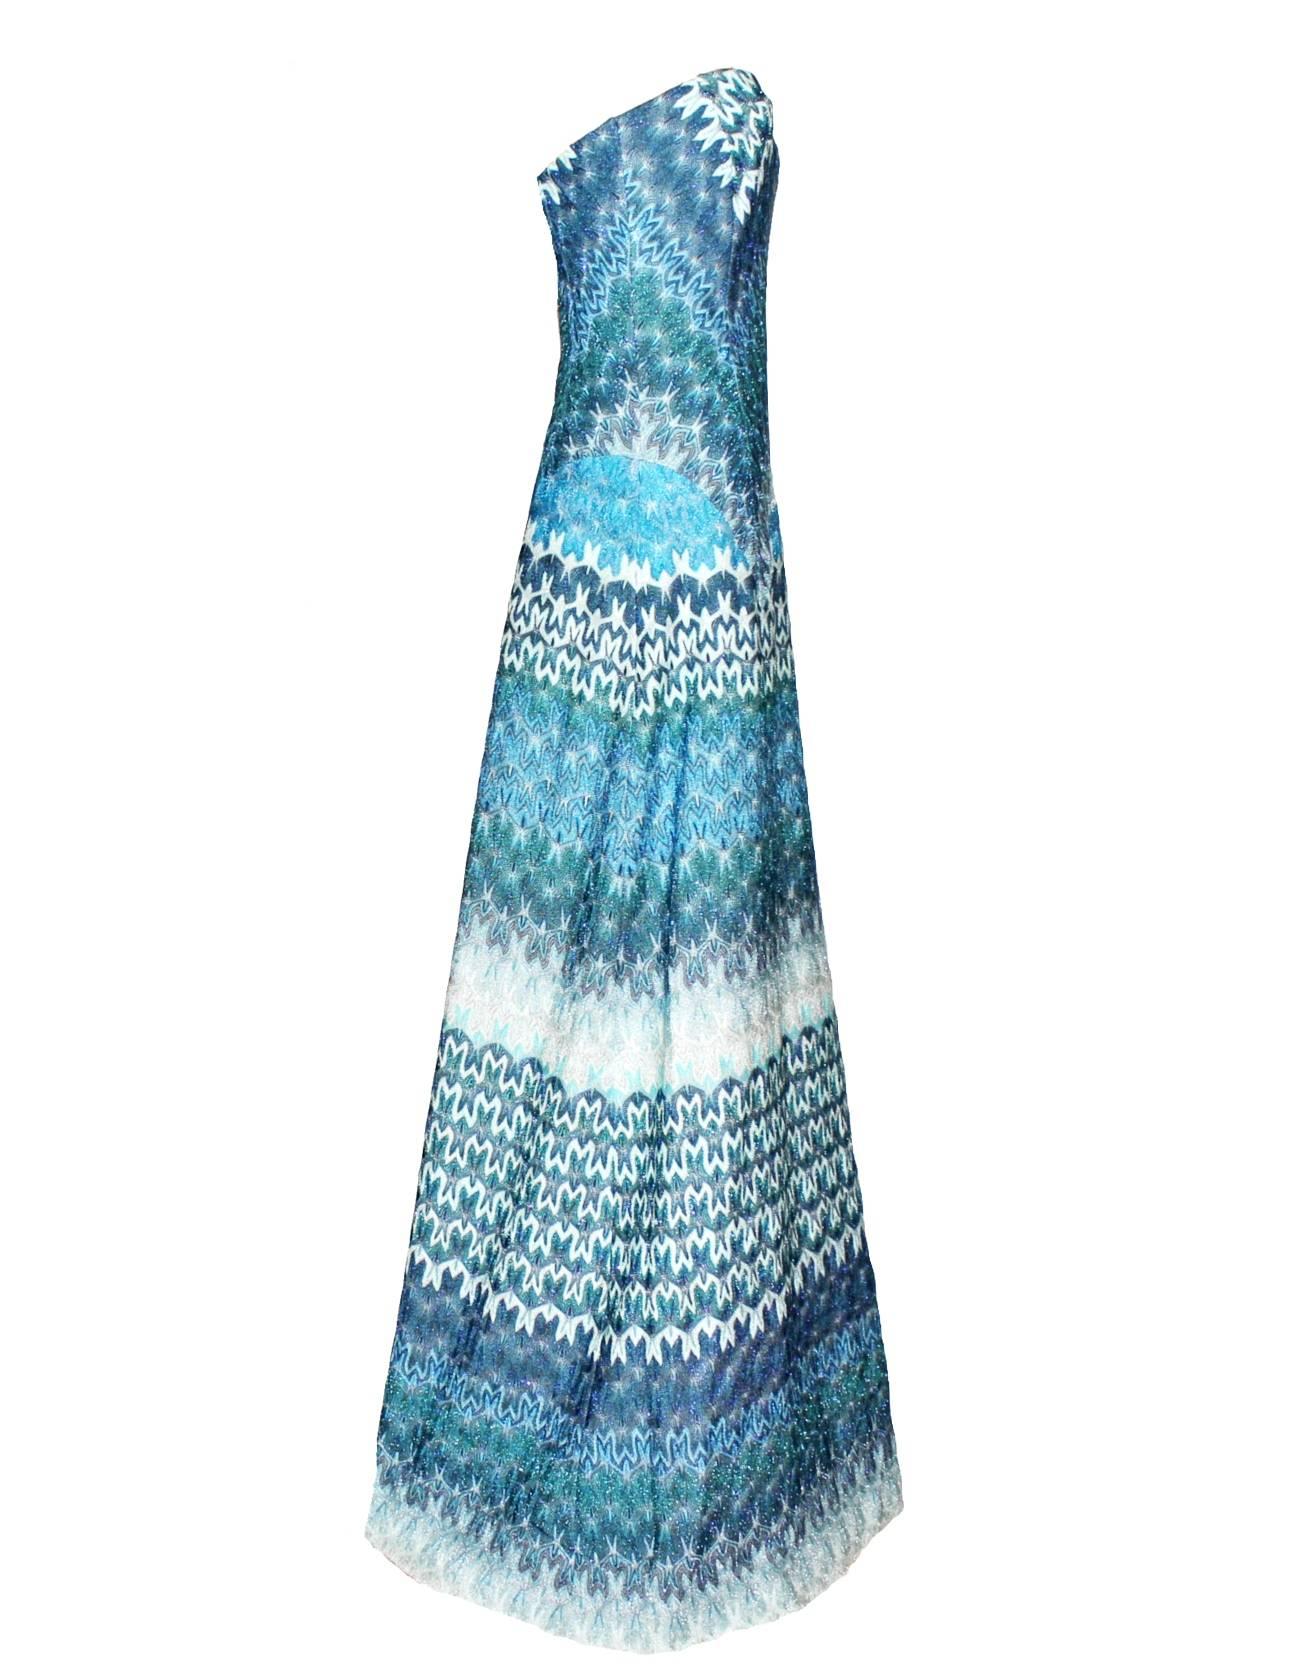  LUXURIOUS

 MISSONI SEAFOAM LUREX EVENING GOWN

A stunning evening gown by MISSONI - impossible to find!
Orange Label - Missoni's exclusivest main collection
Floor sweeping full length
Boned bustier top for a perfect fit
Beautiful